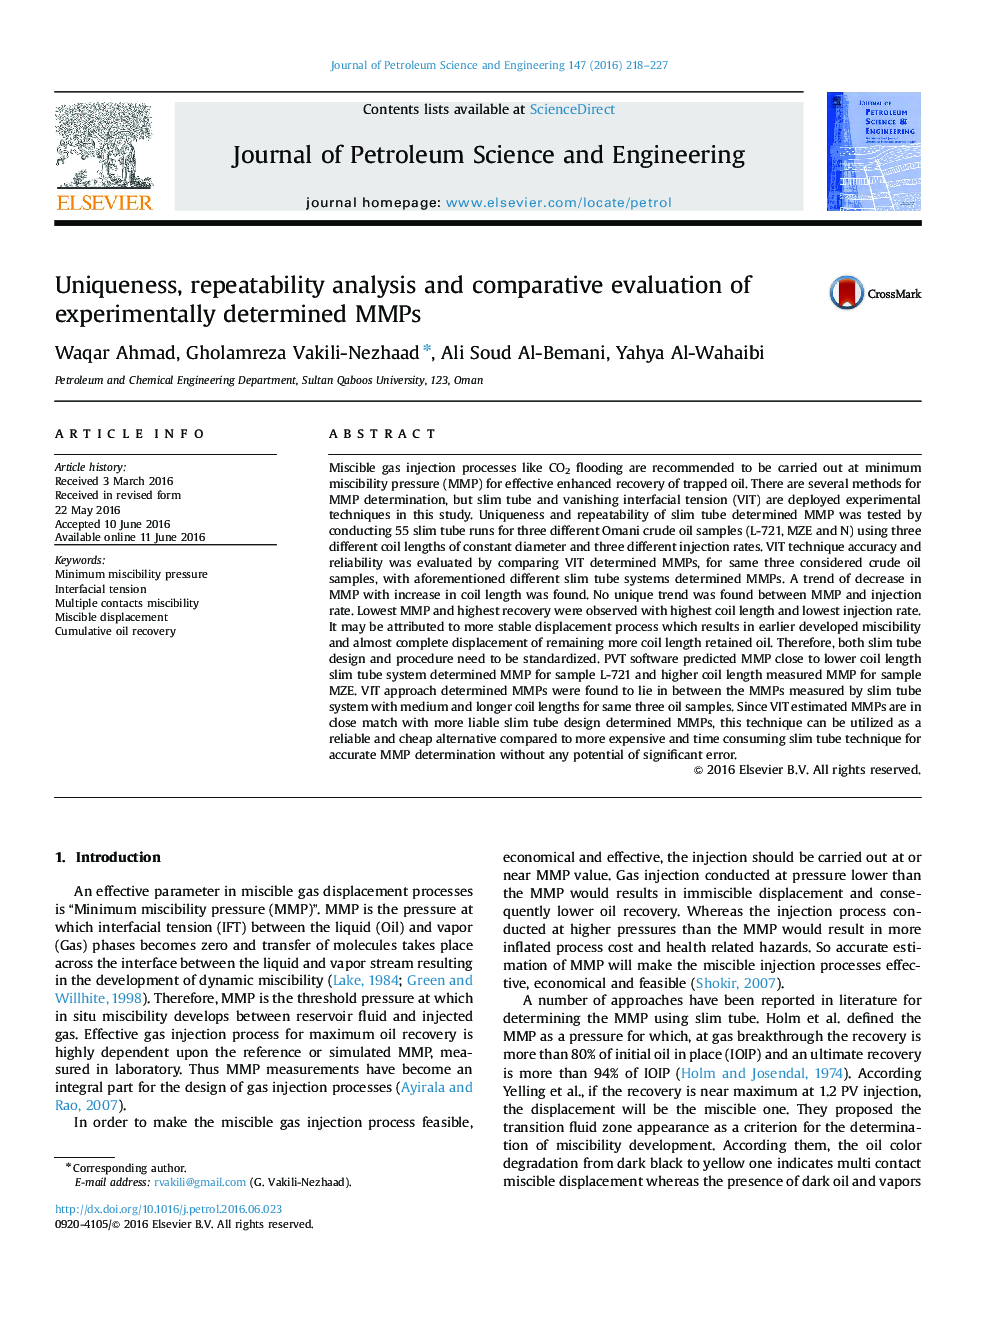 Uniqueness, repeatability analysis and comparative evaluation of experimentally determined MMPs